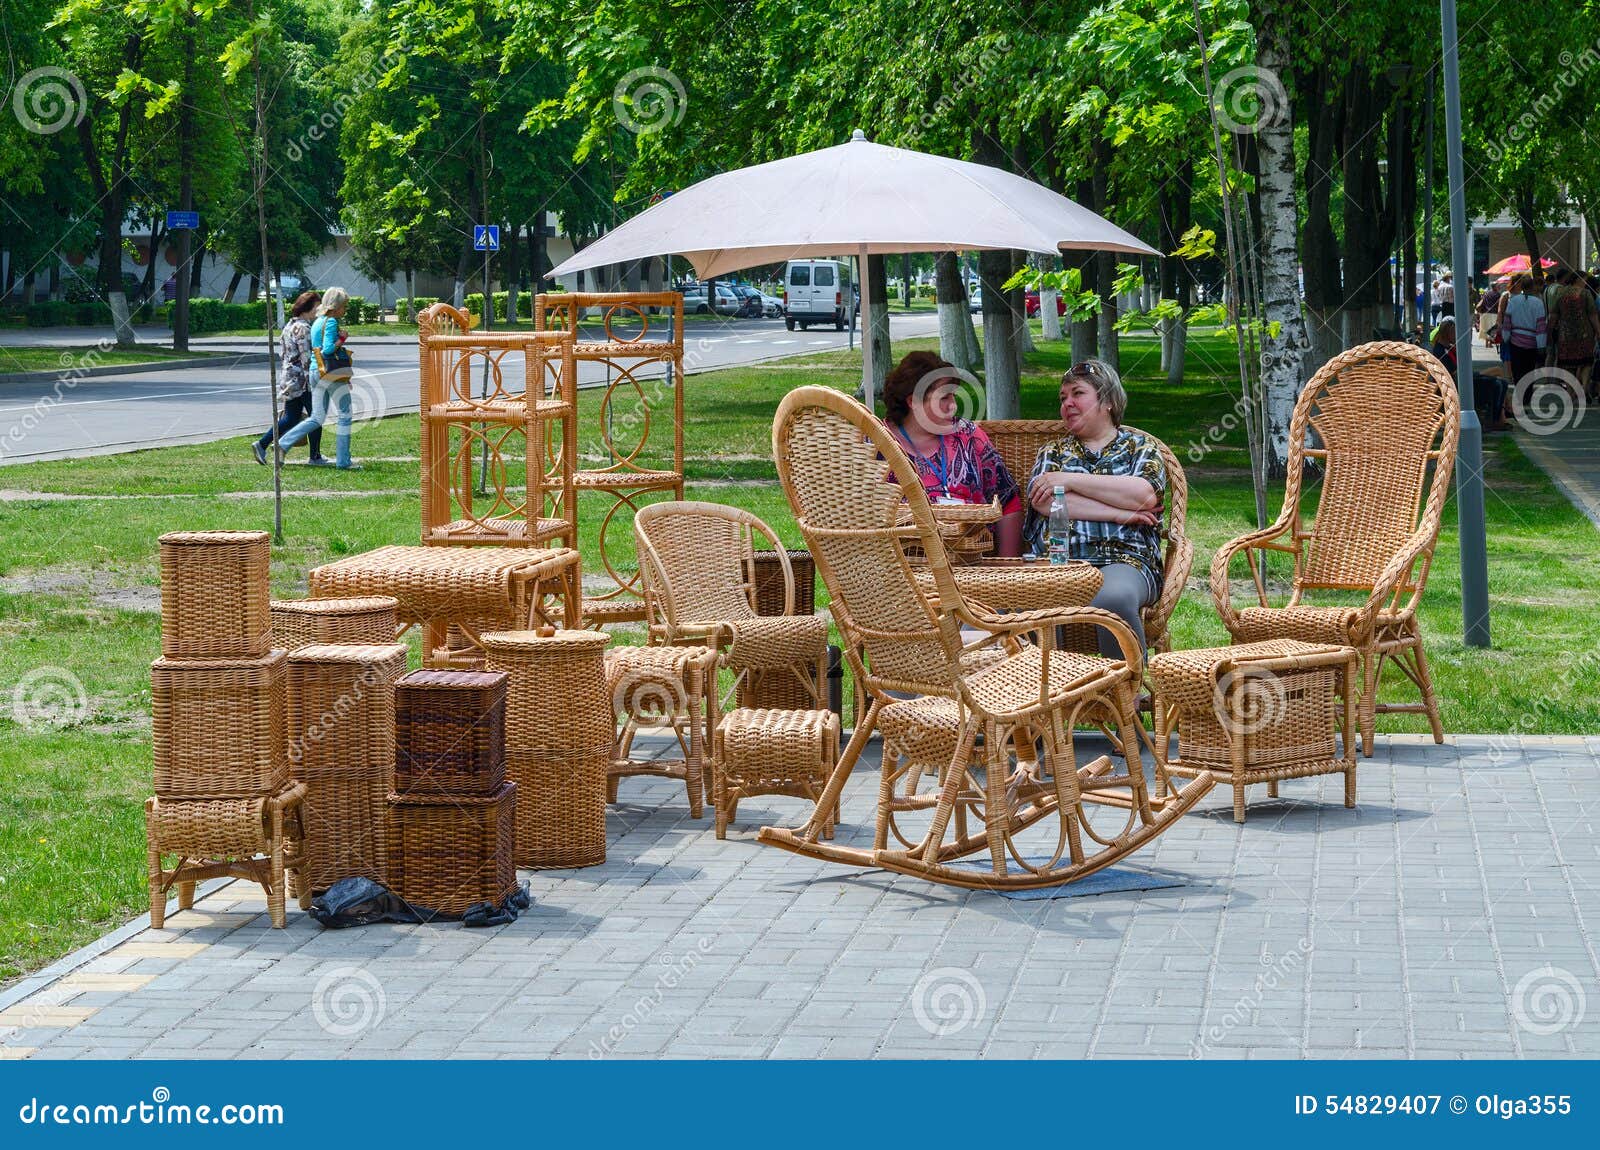 Event City Of Masters Exhibition And Sale Of Wicker Furniture